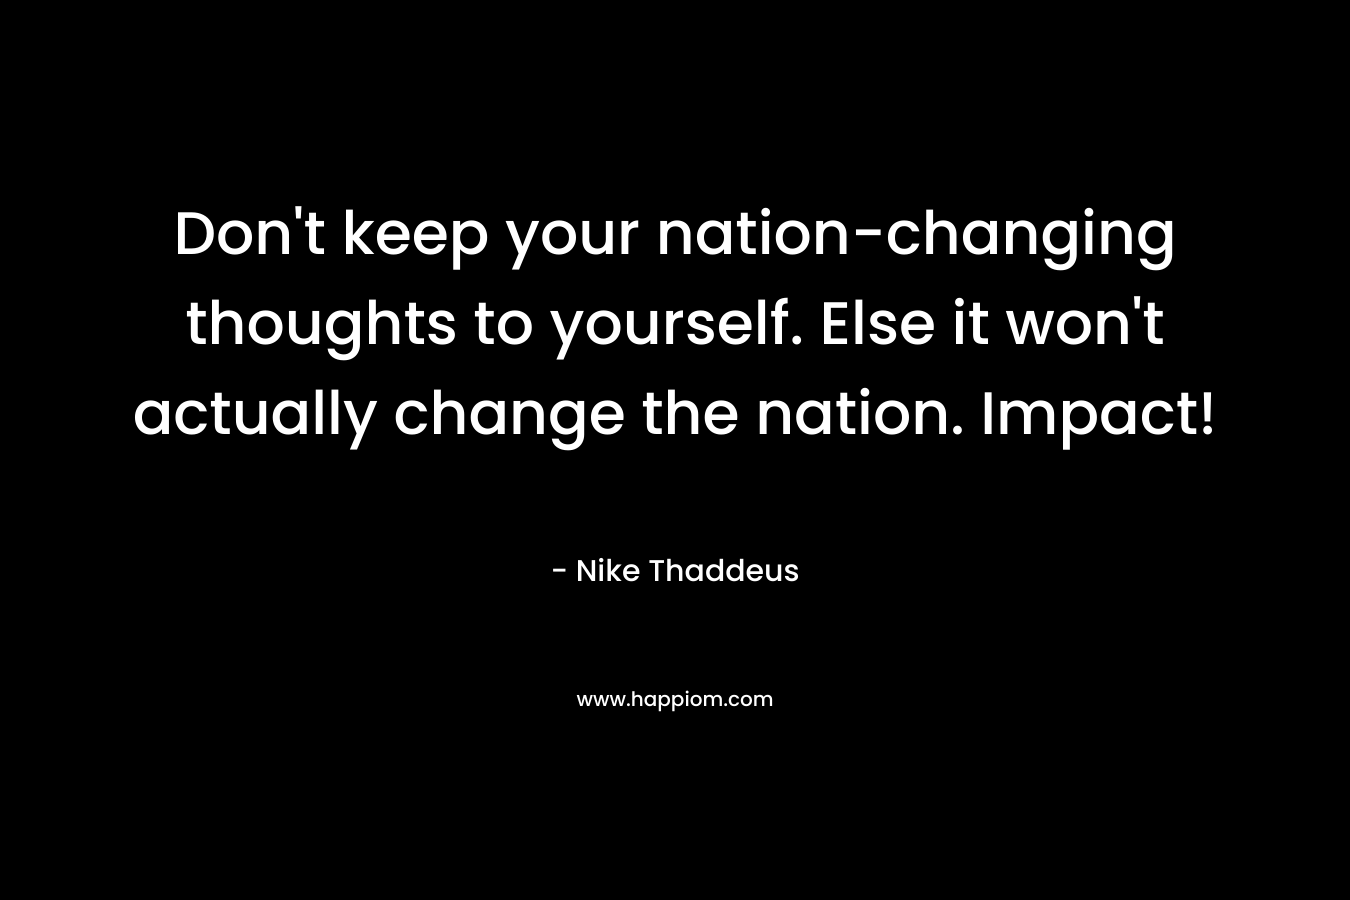 Don't keep your nation-changing thoughts to yourself. Else it won't actually change the nation. Impact!